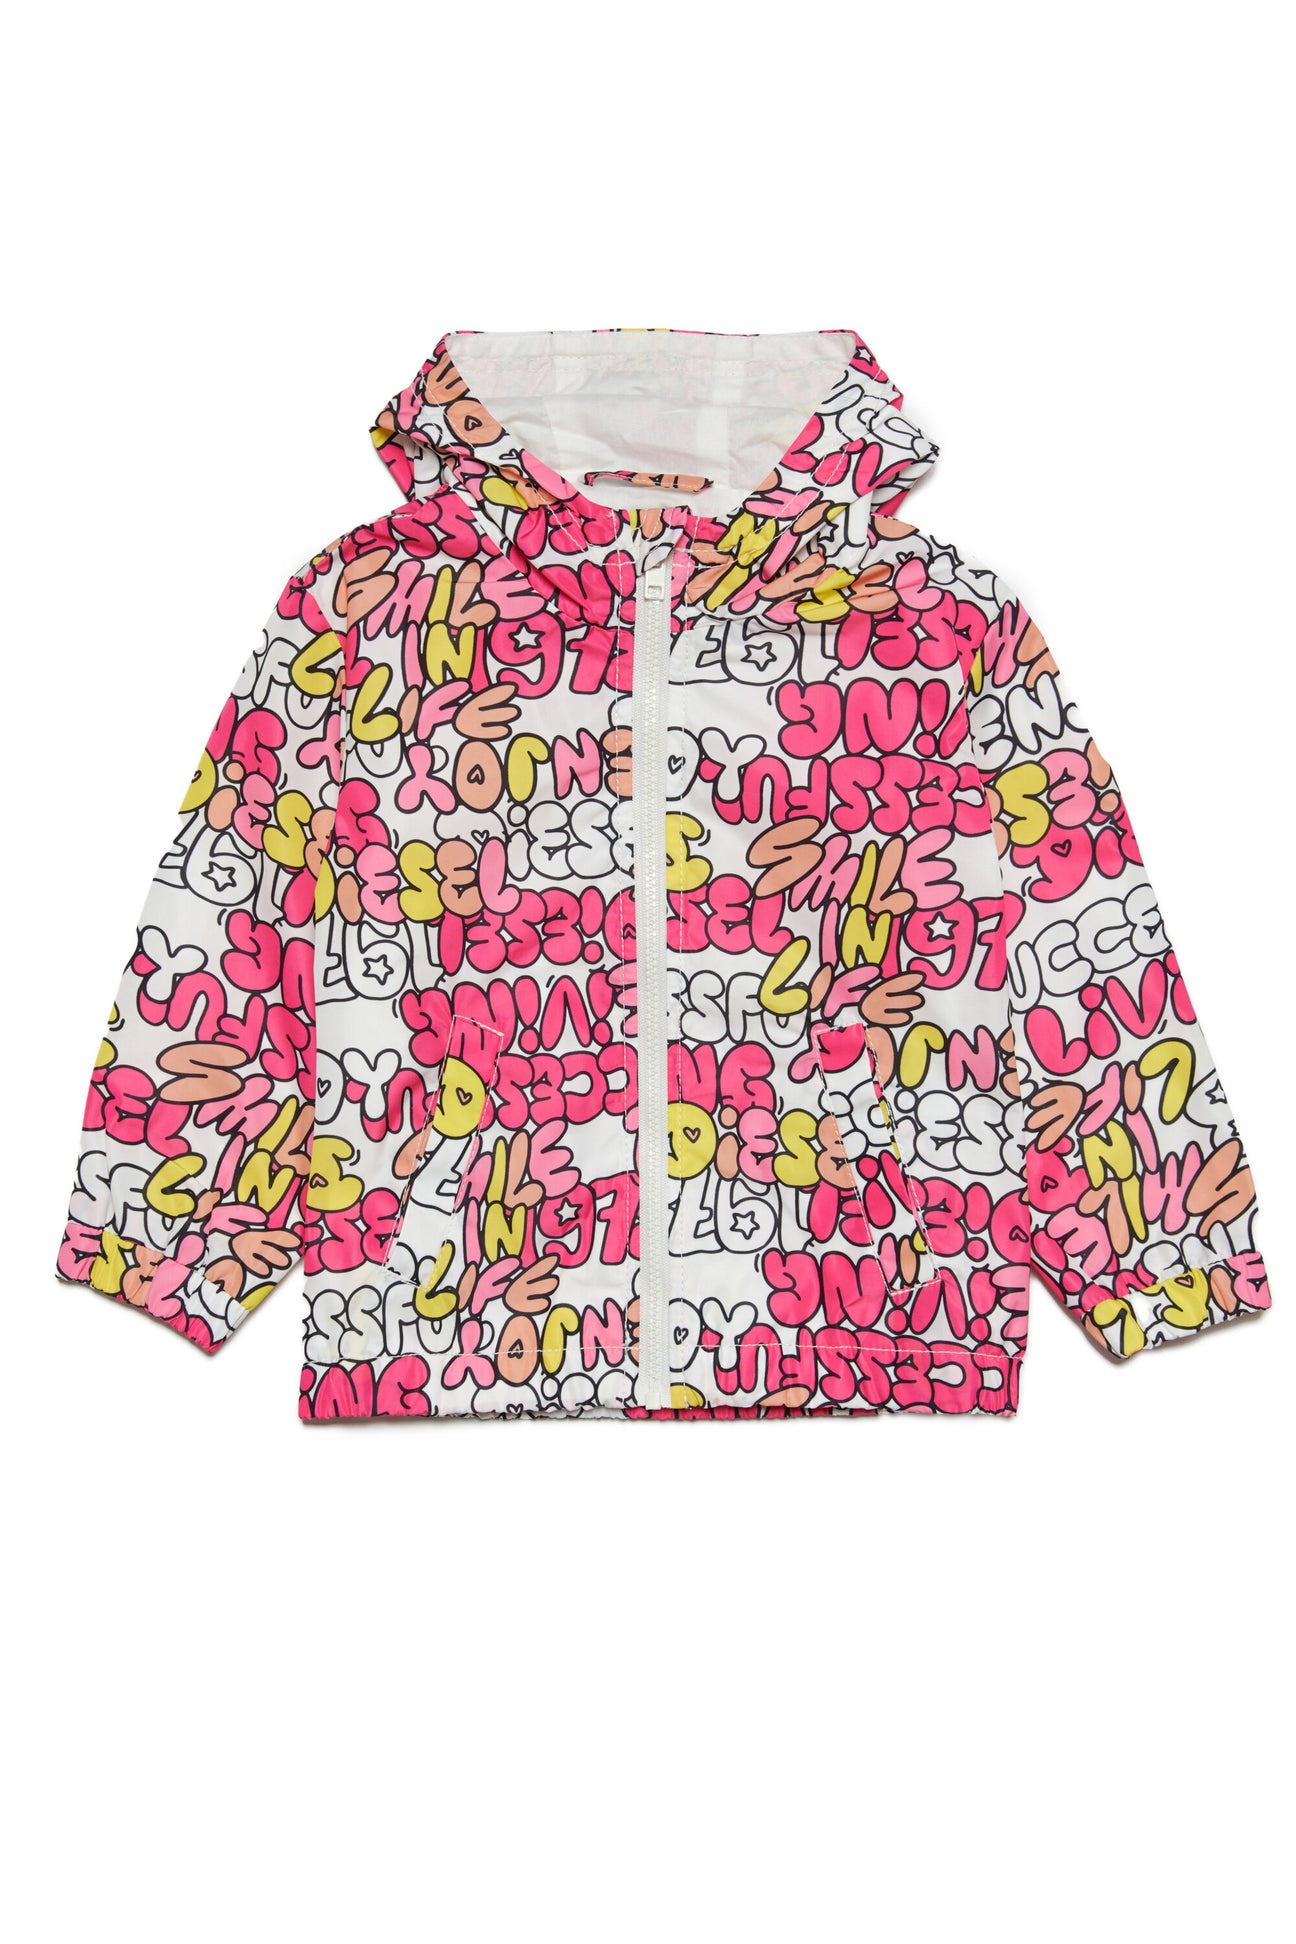 Giacca windbreaker allover bubble text Giacca windbreaker allover bubble text